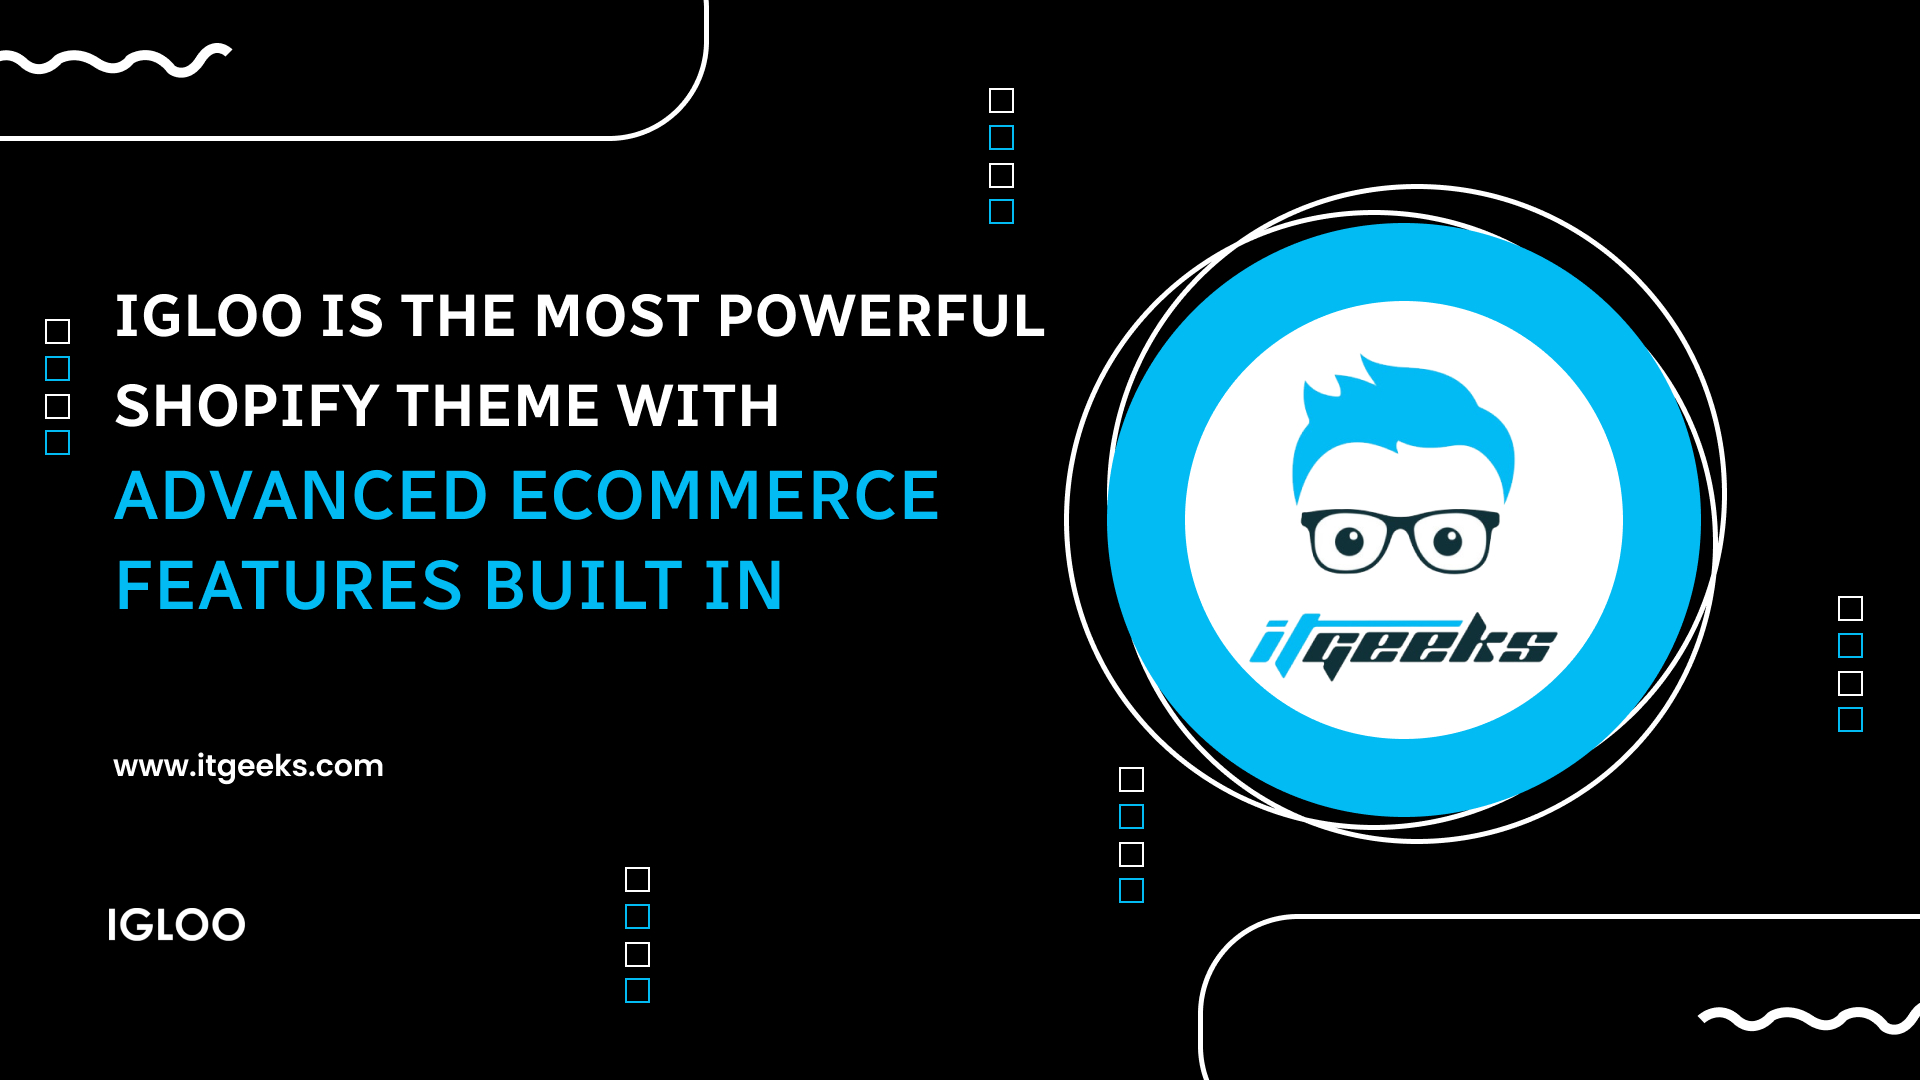 Igloo Is the Most Powerful Shopify Theme with Advanced Ecommerce Features Built In